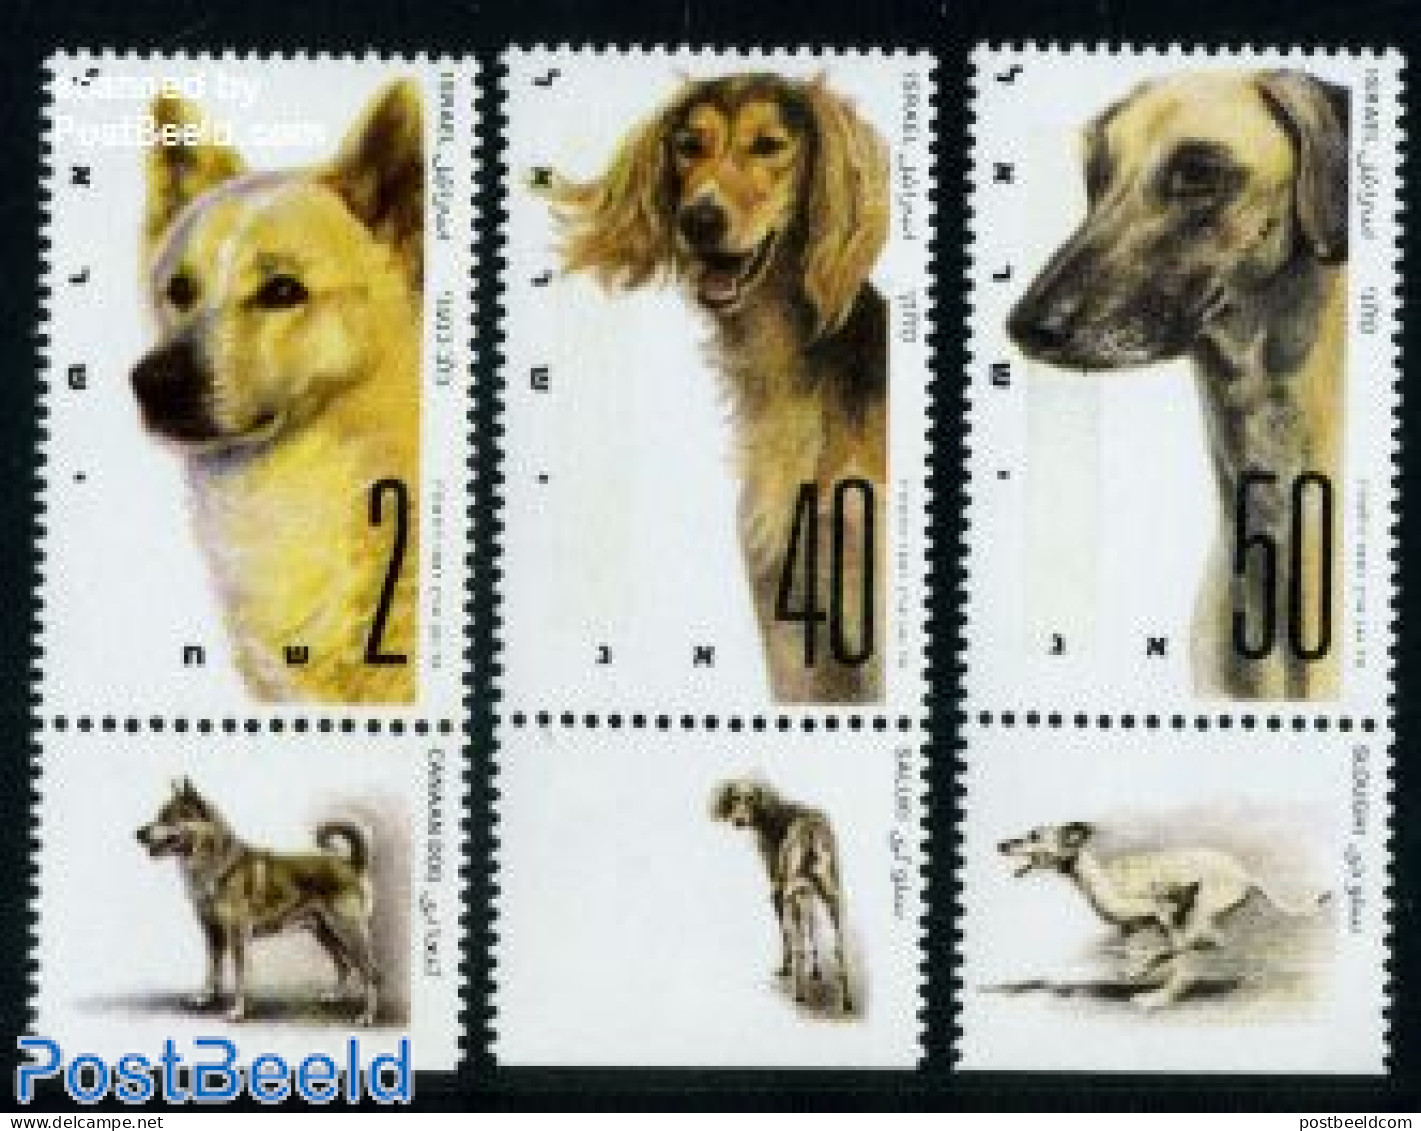 Israel 1987 Dog Exposition 3v, Mint NH, Nature - Dogs - Unused Stamps (with Tabs)